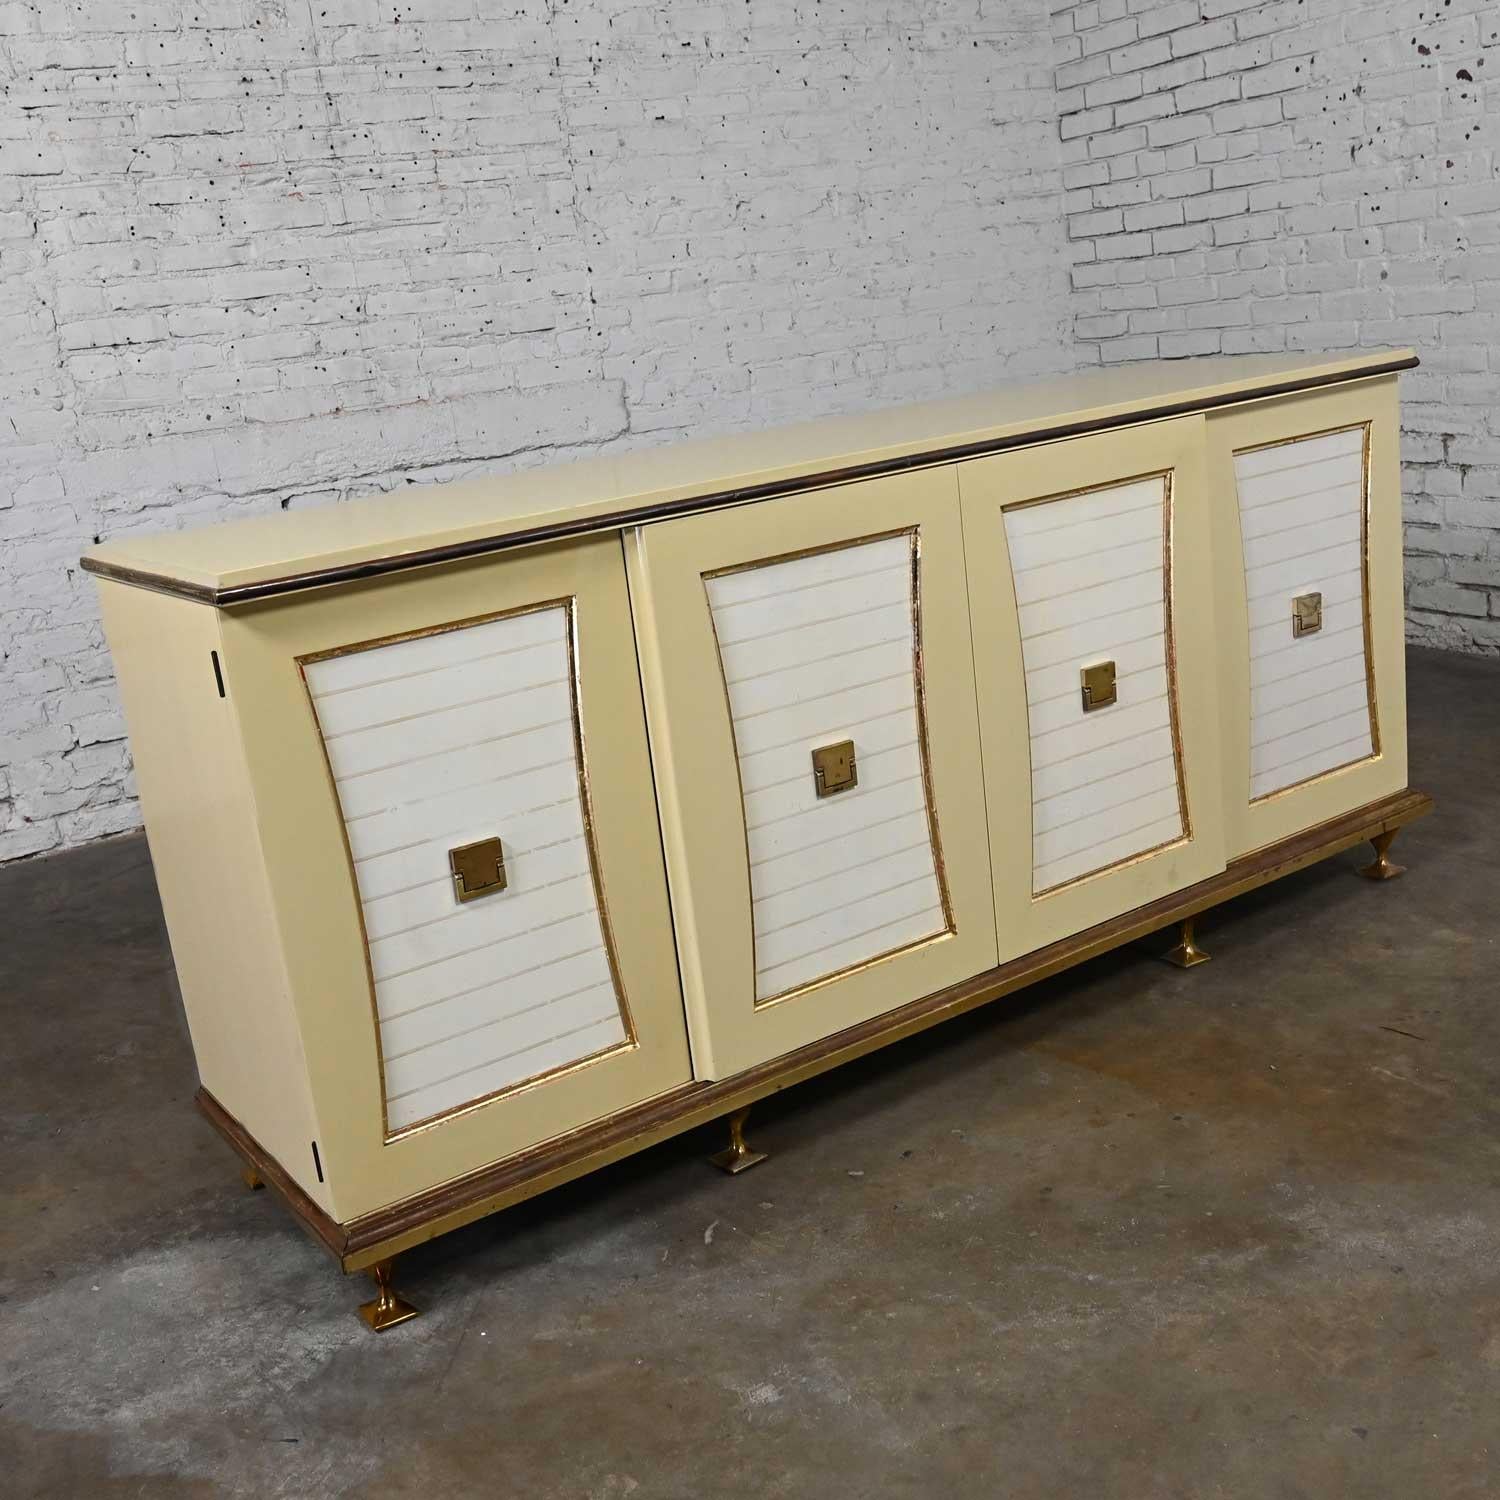 Mid-20th Hollywood Regency Credenza or Dresser by Renzo Rutili for Johnson Furn In Good Condition For Sale In Topeka, KS